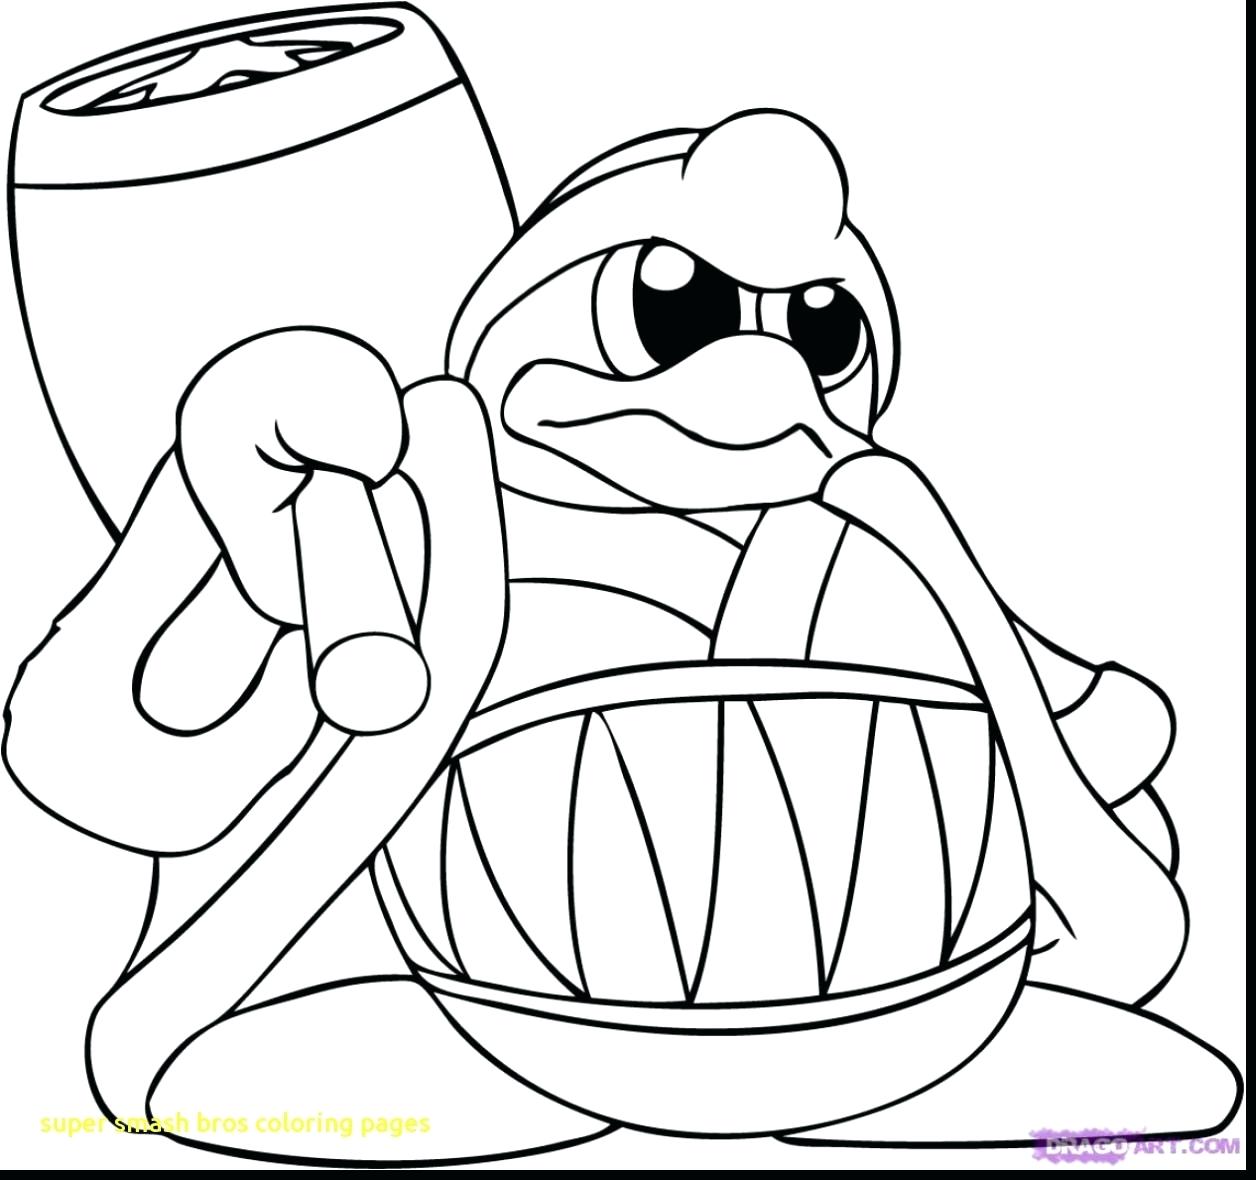 Smash Bros Coloring Pages at GetColorings.com | Free printable